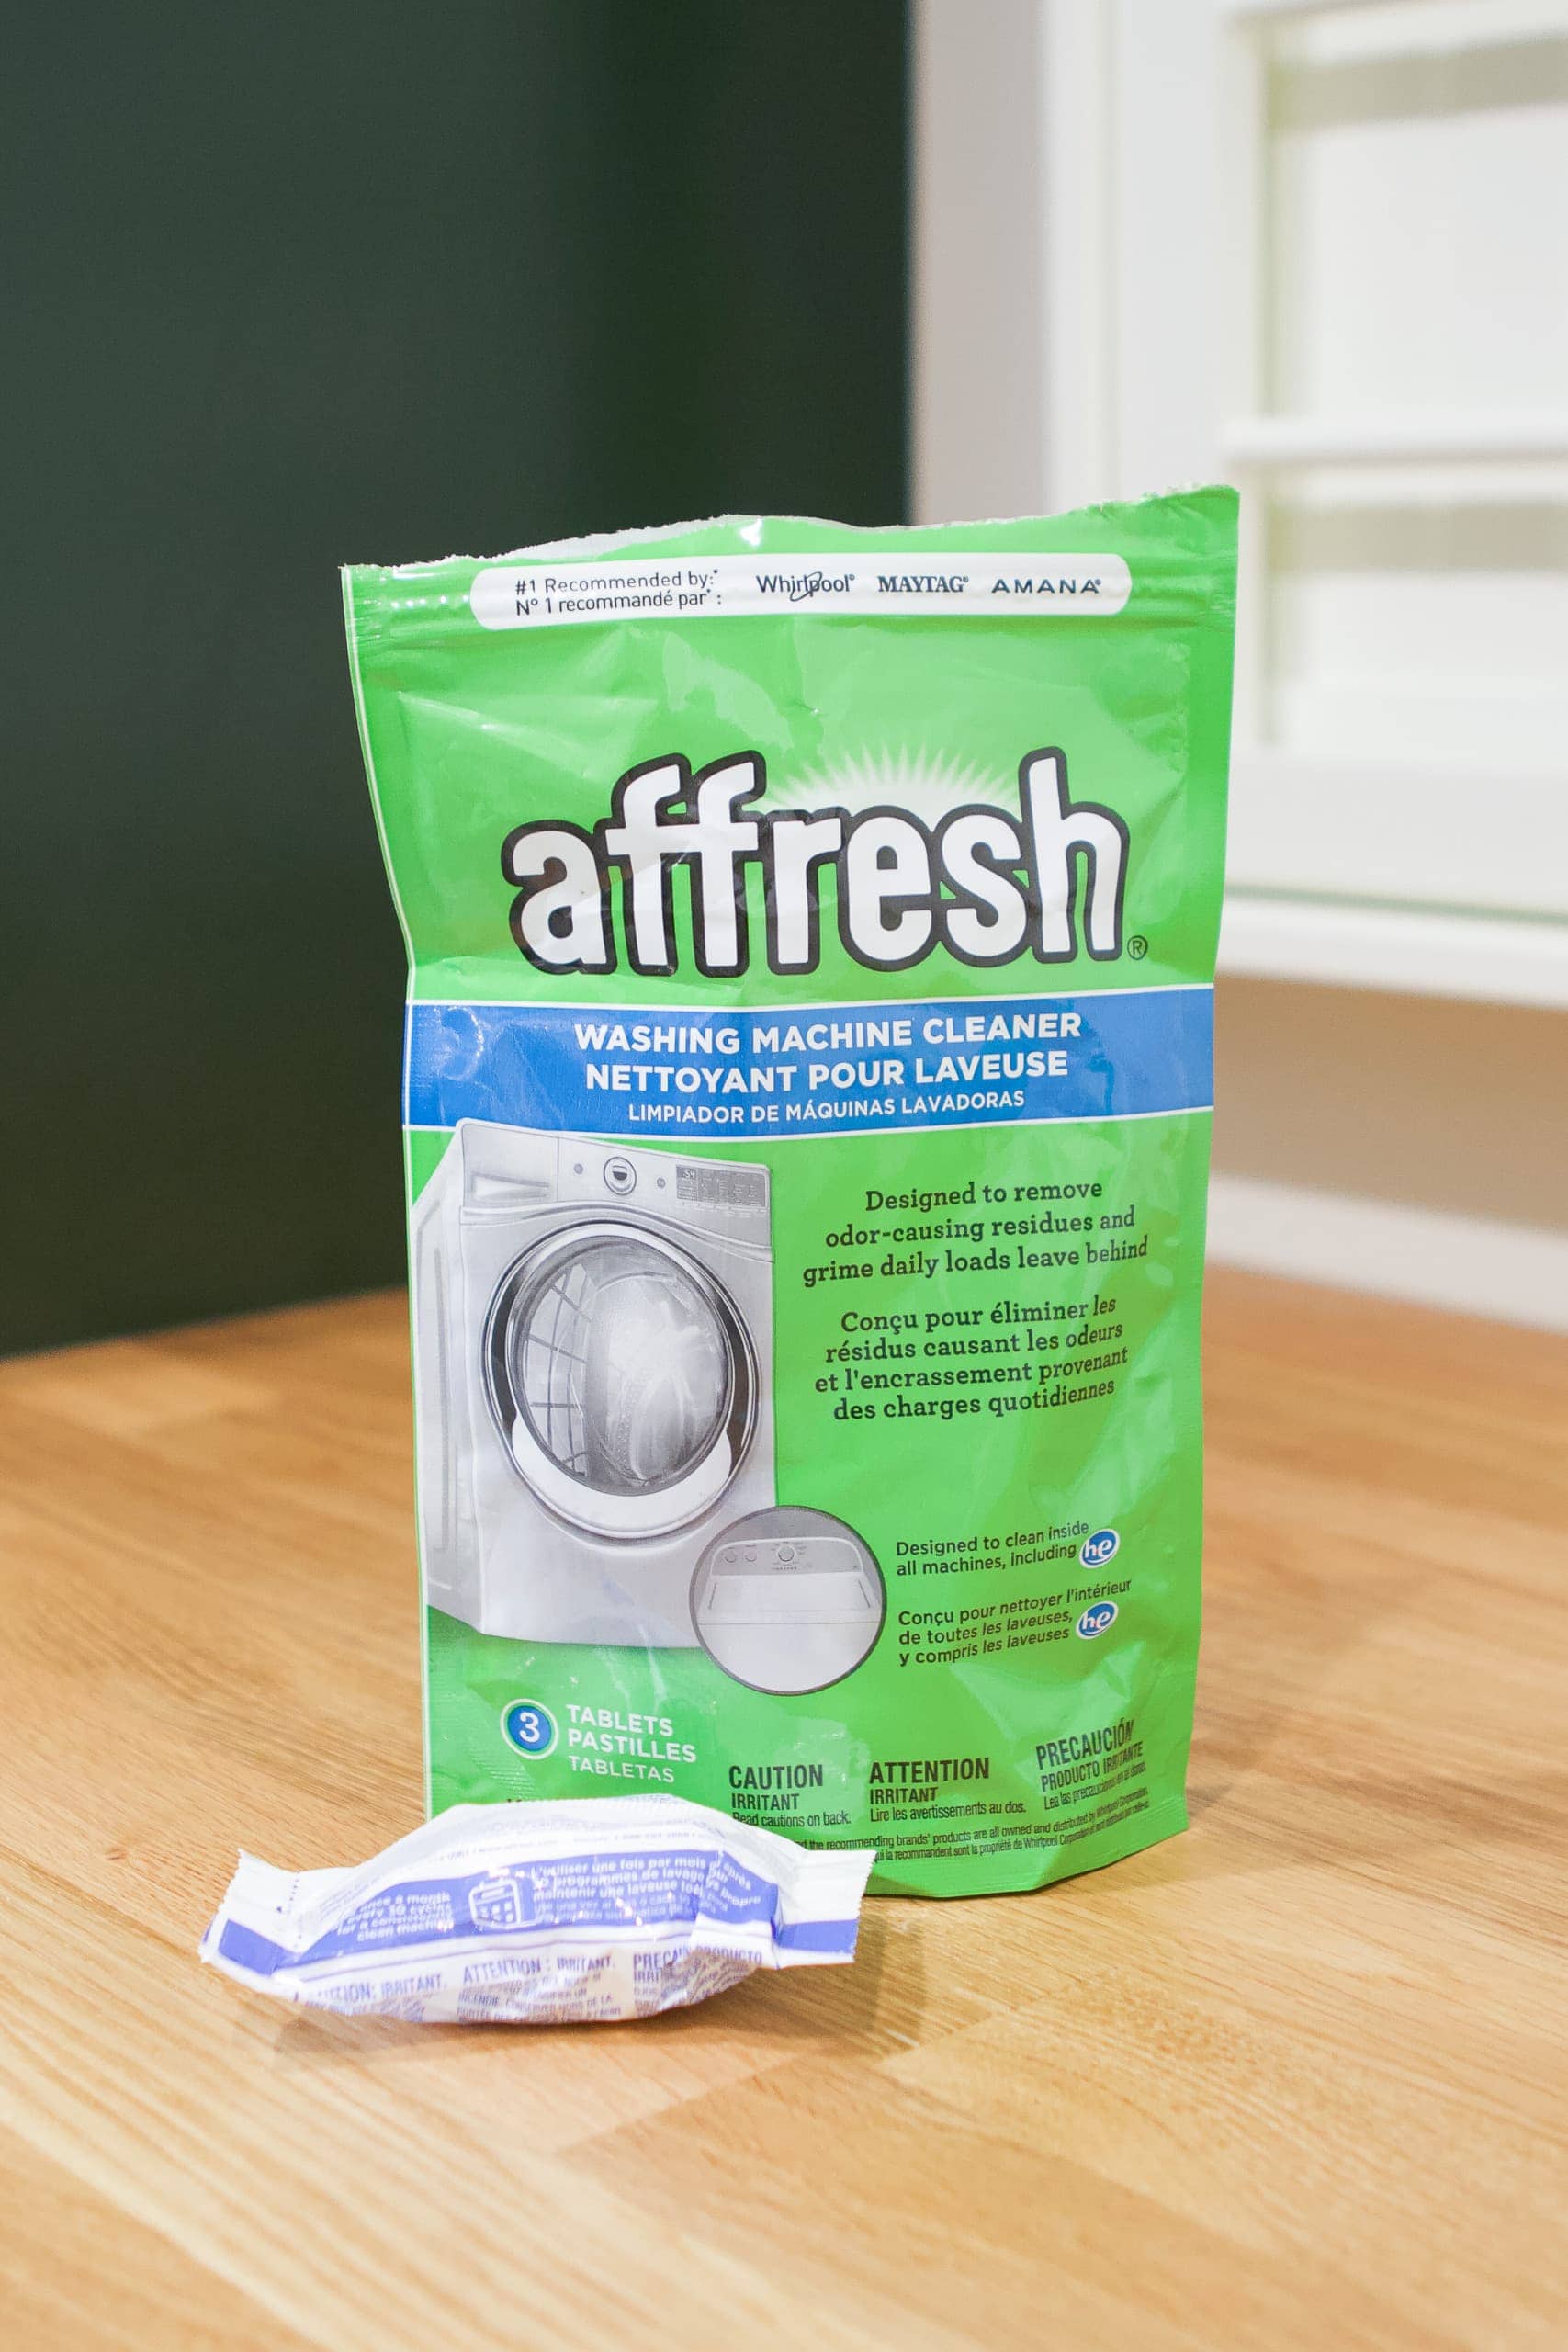 Affresh cleaning tablets